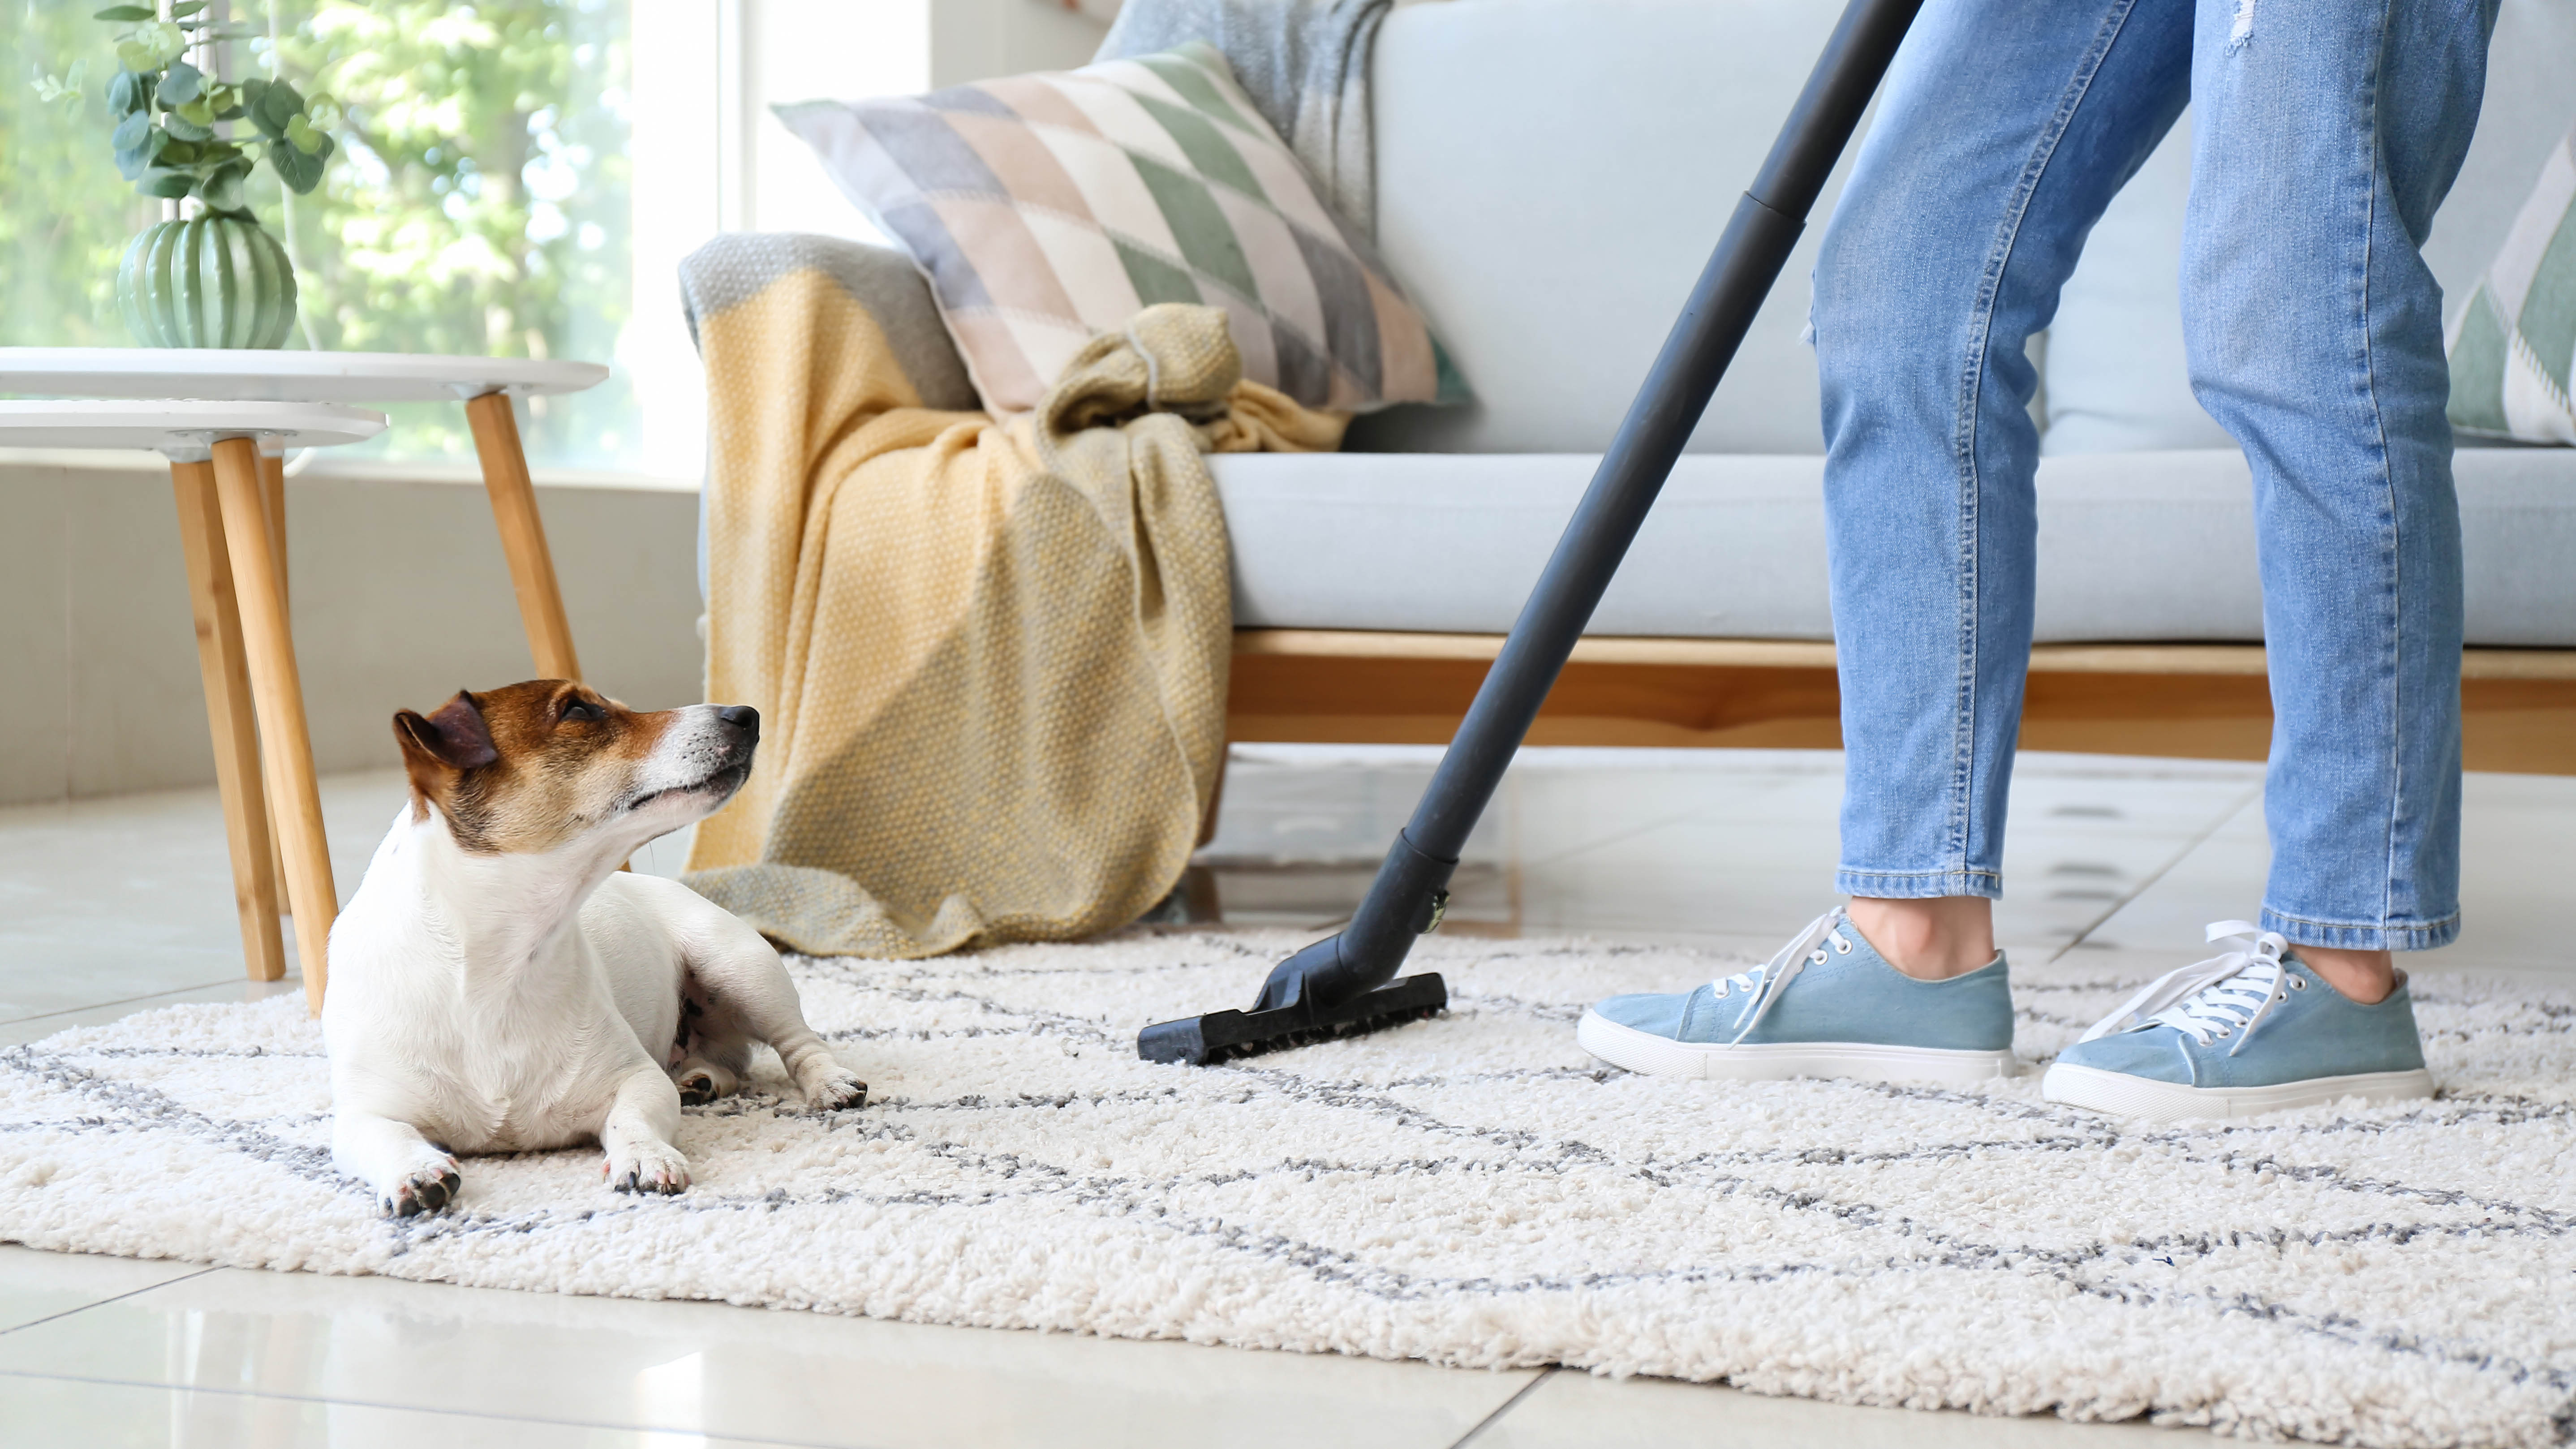 Someone vacuuming a rug in their home next to a dog